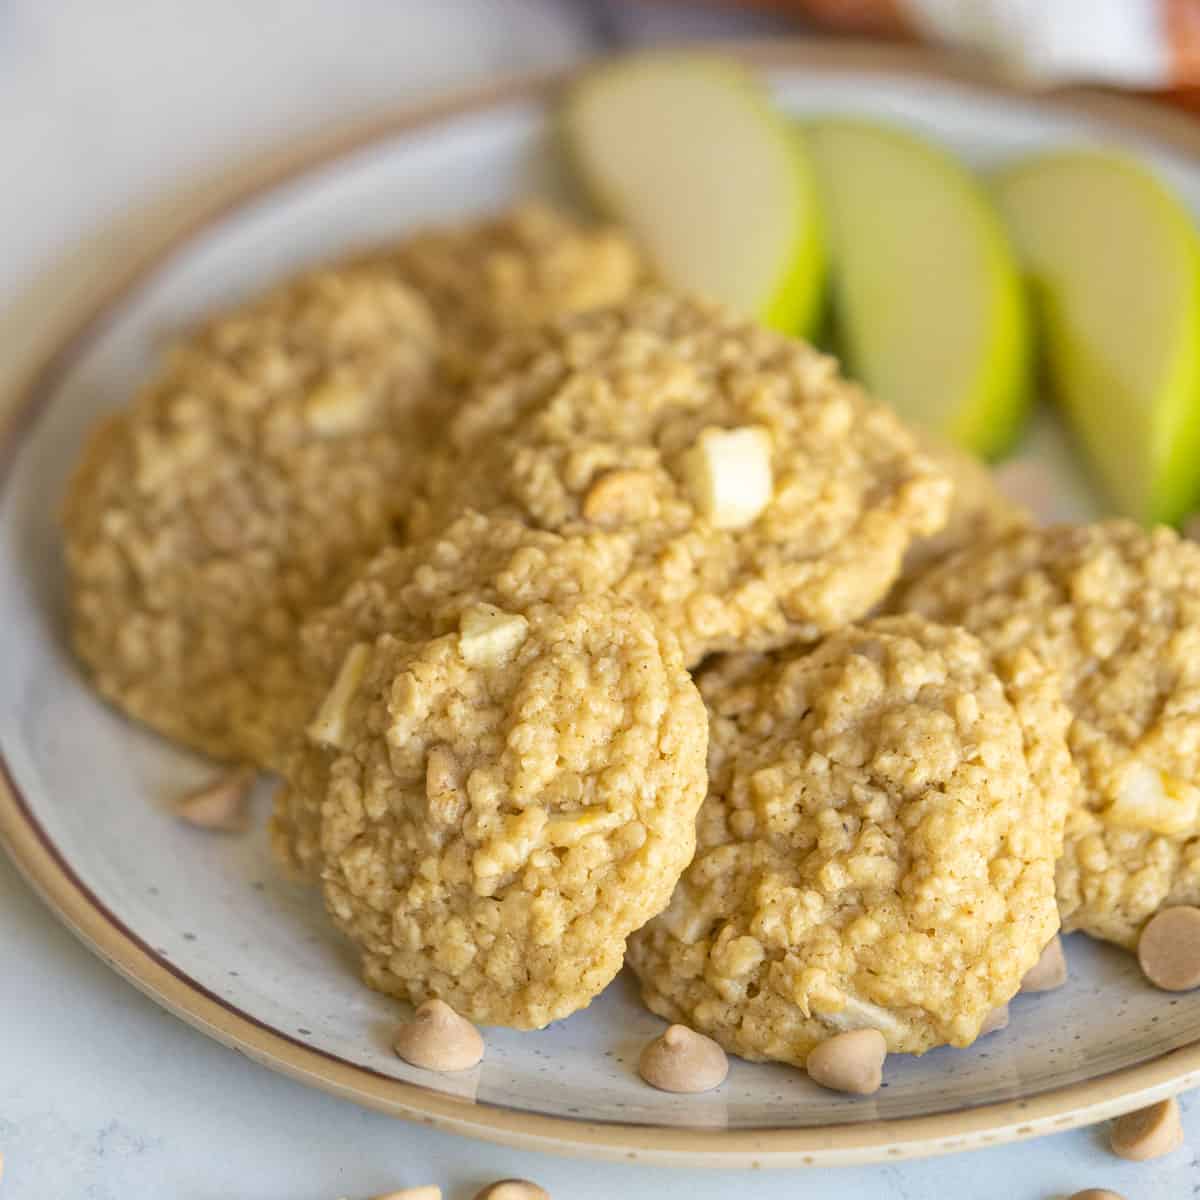 Apple Caramel Oatmeal Cookies on a plate with slices of apple and caramel bits.